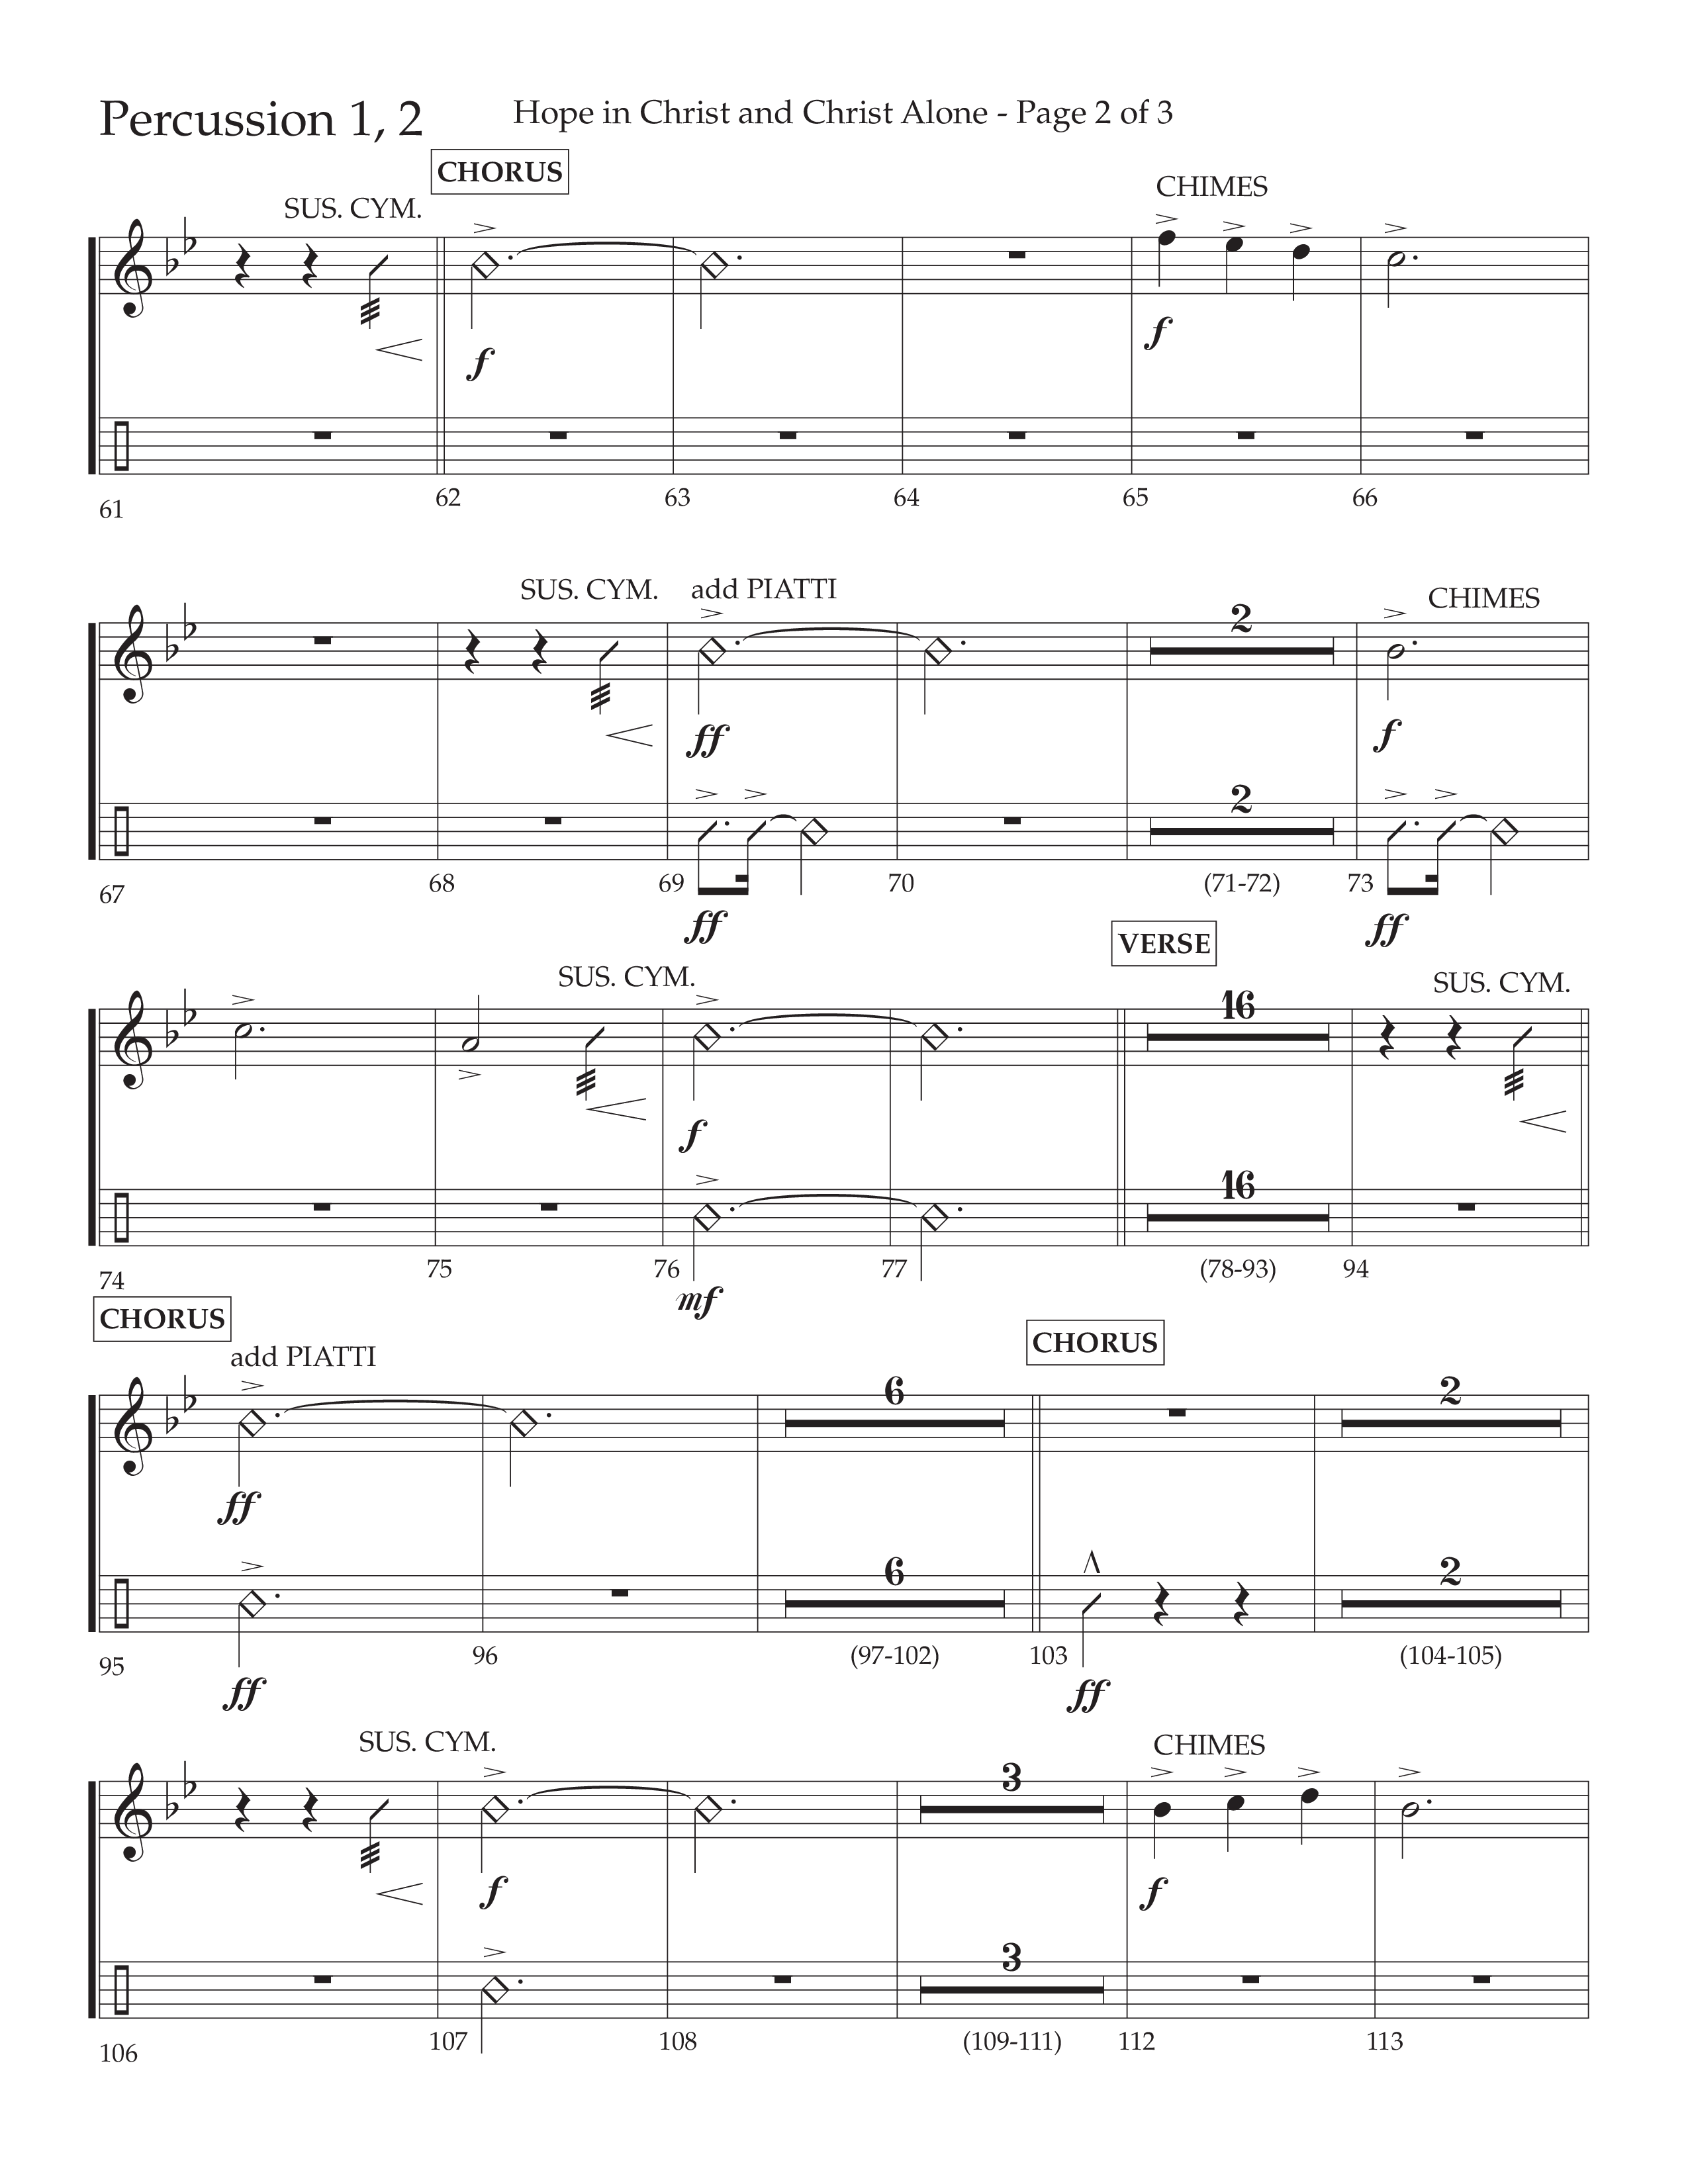 Hope In Christ And Christ Alone (Choral Anthem SATB) Percussion 1/2 (Lifeway Choral / Arr. Cliff Duren)